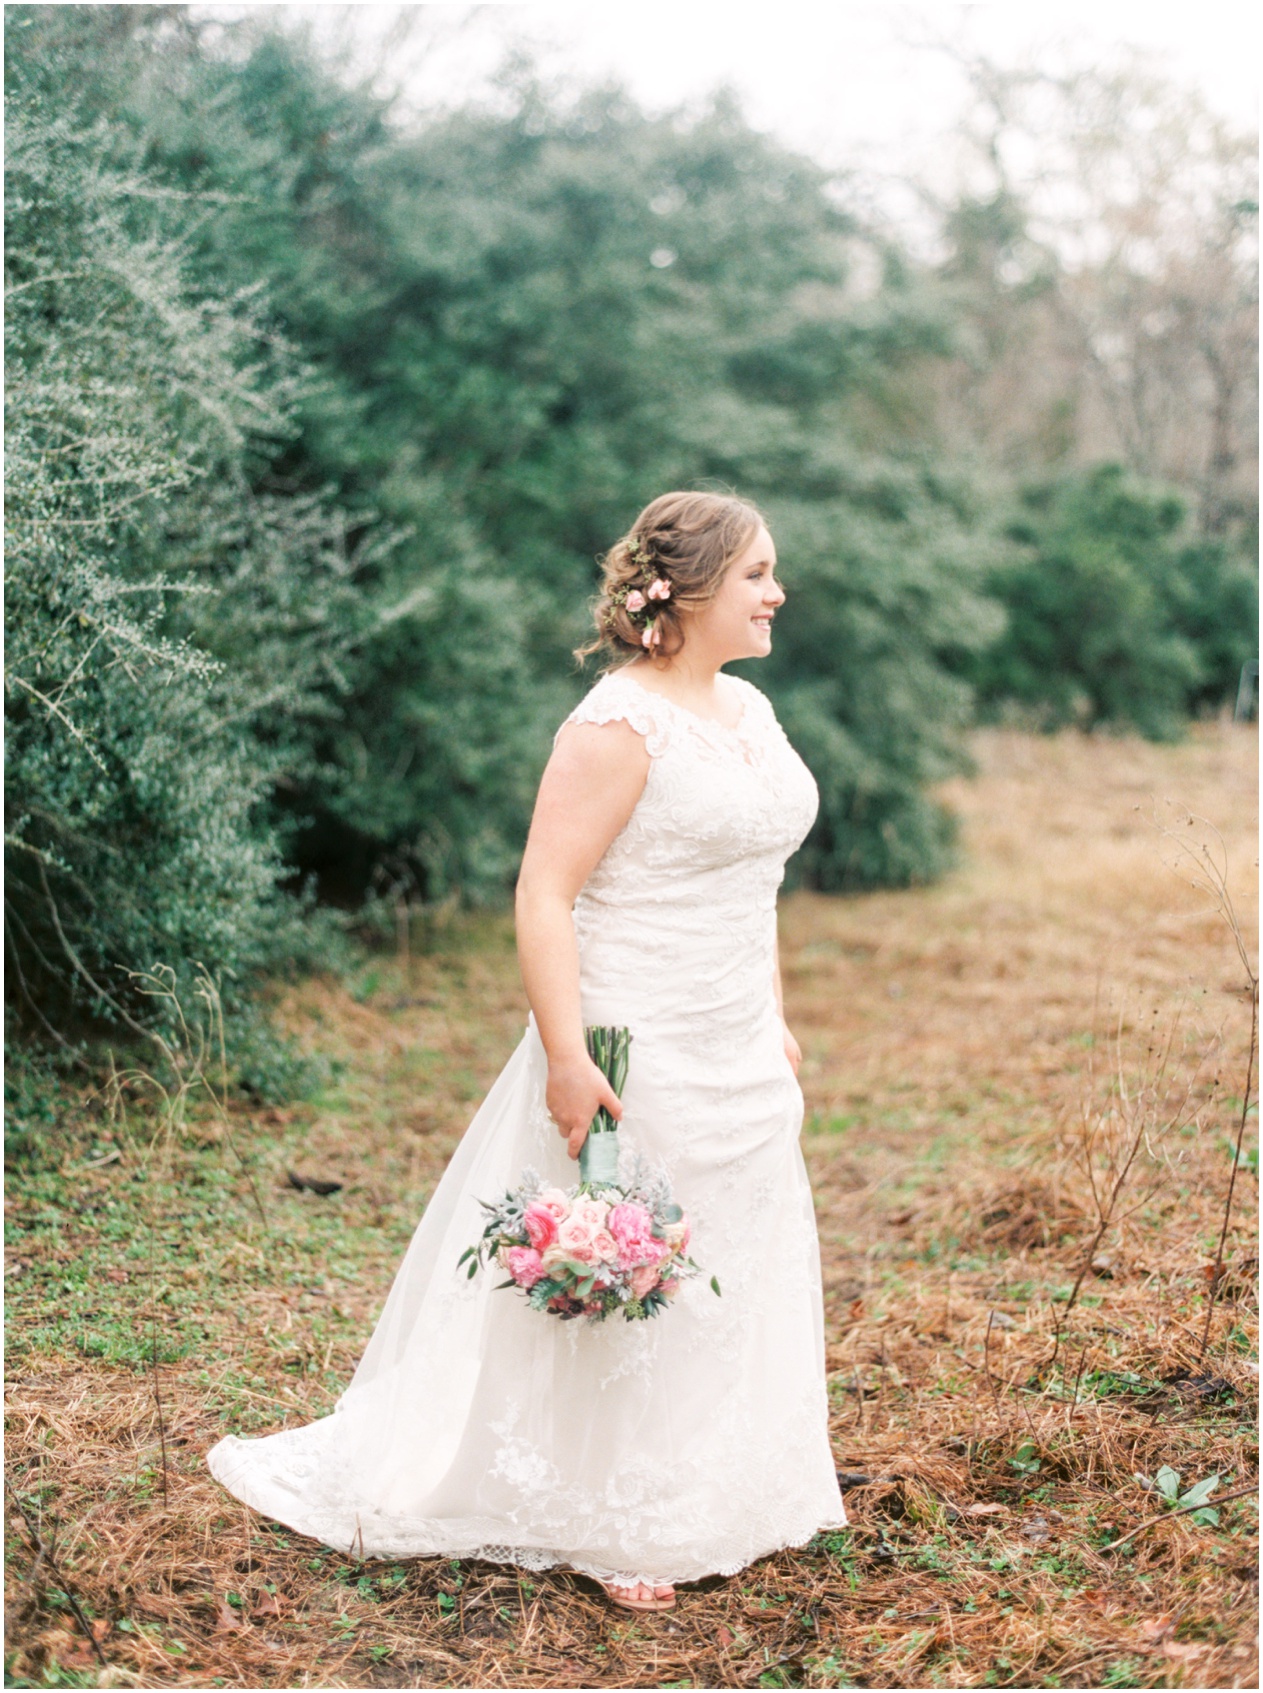 Sarah Best Photography - Claire's Bridals - The Amish Barn at Edge-38_STP.jpg